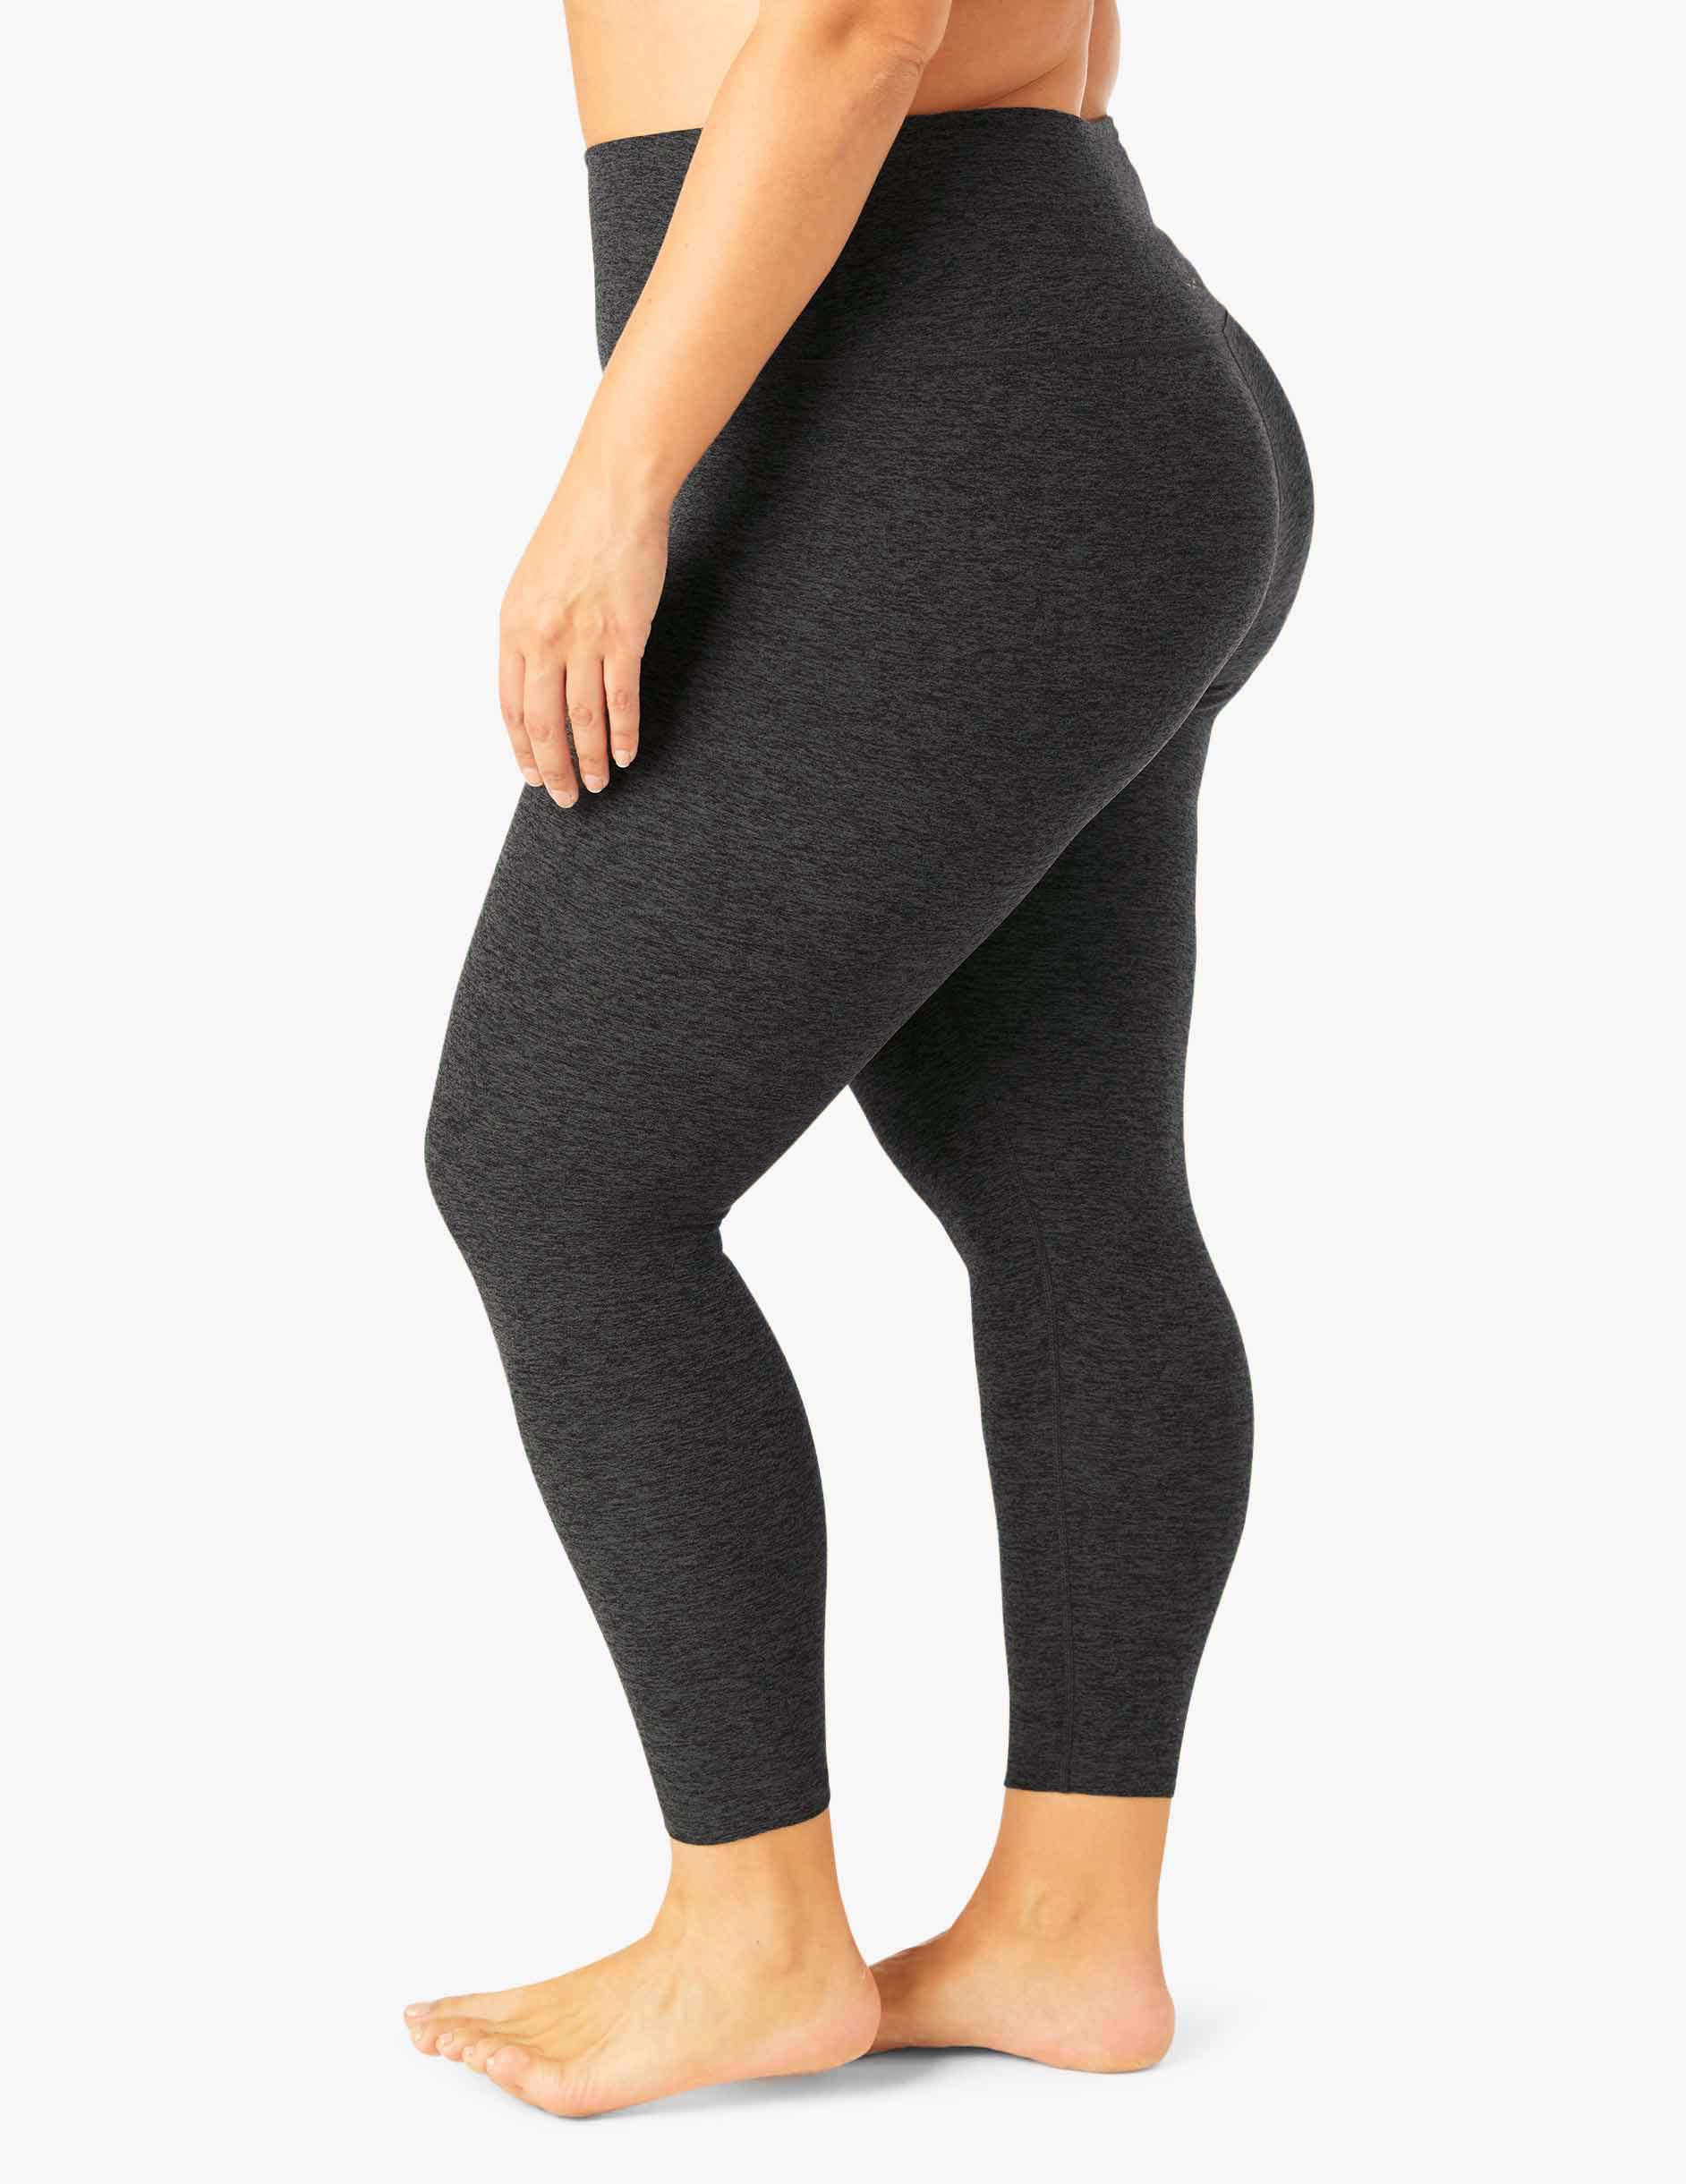 Beyond Yoga leggings XS - $33 New With Tags - From Pearl